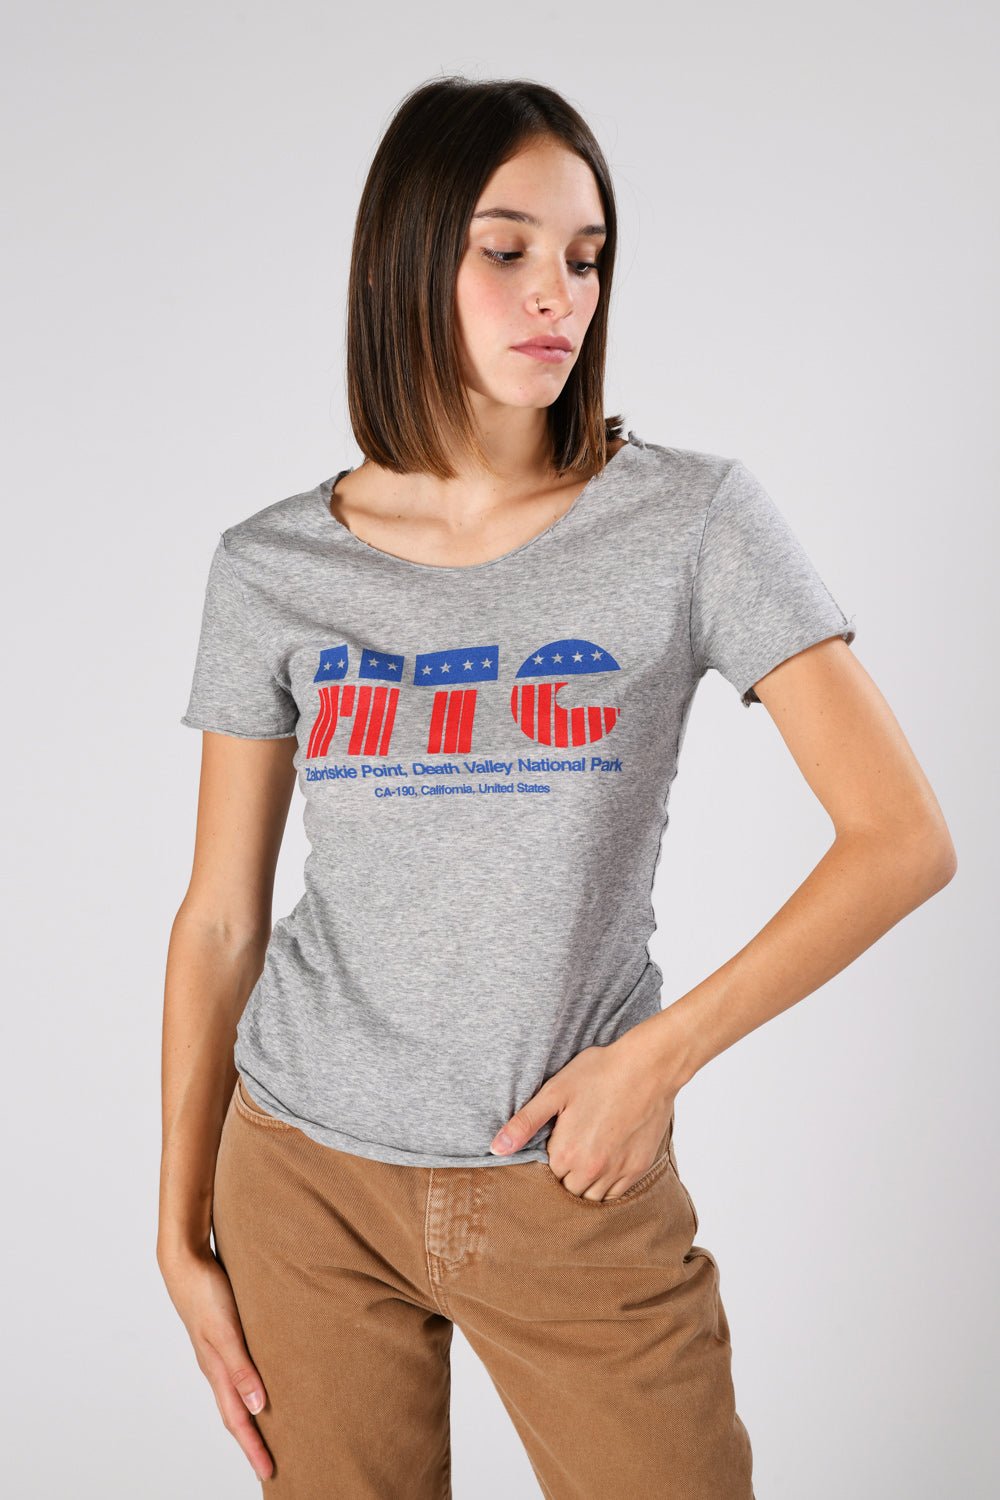 ZABRISKIE POINT WOMAN T-SHIRT Slim fit woman t-shirt printed on the front. 100% cotton HTC LOS ANGELES